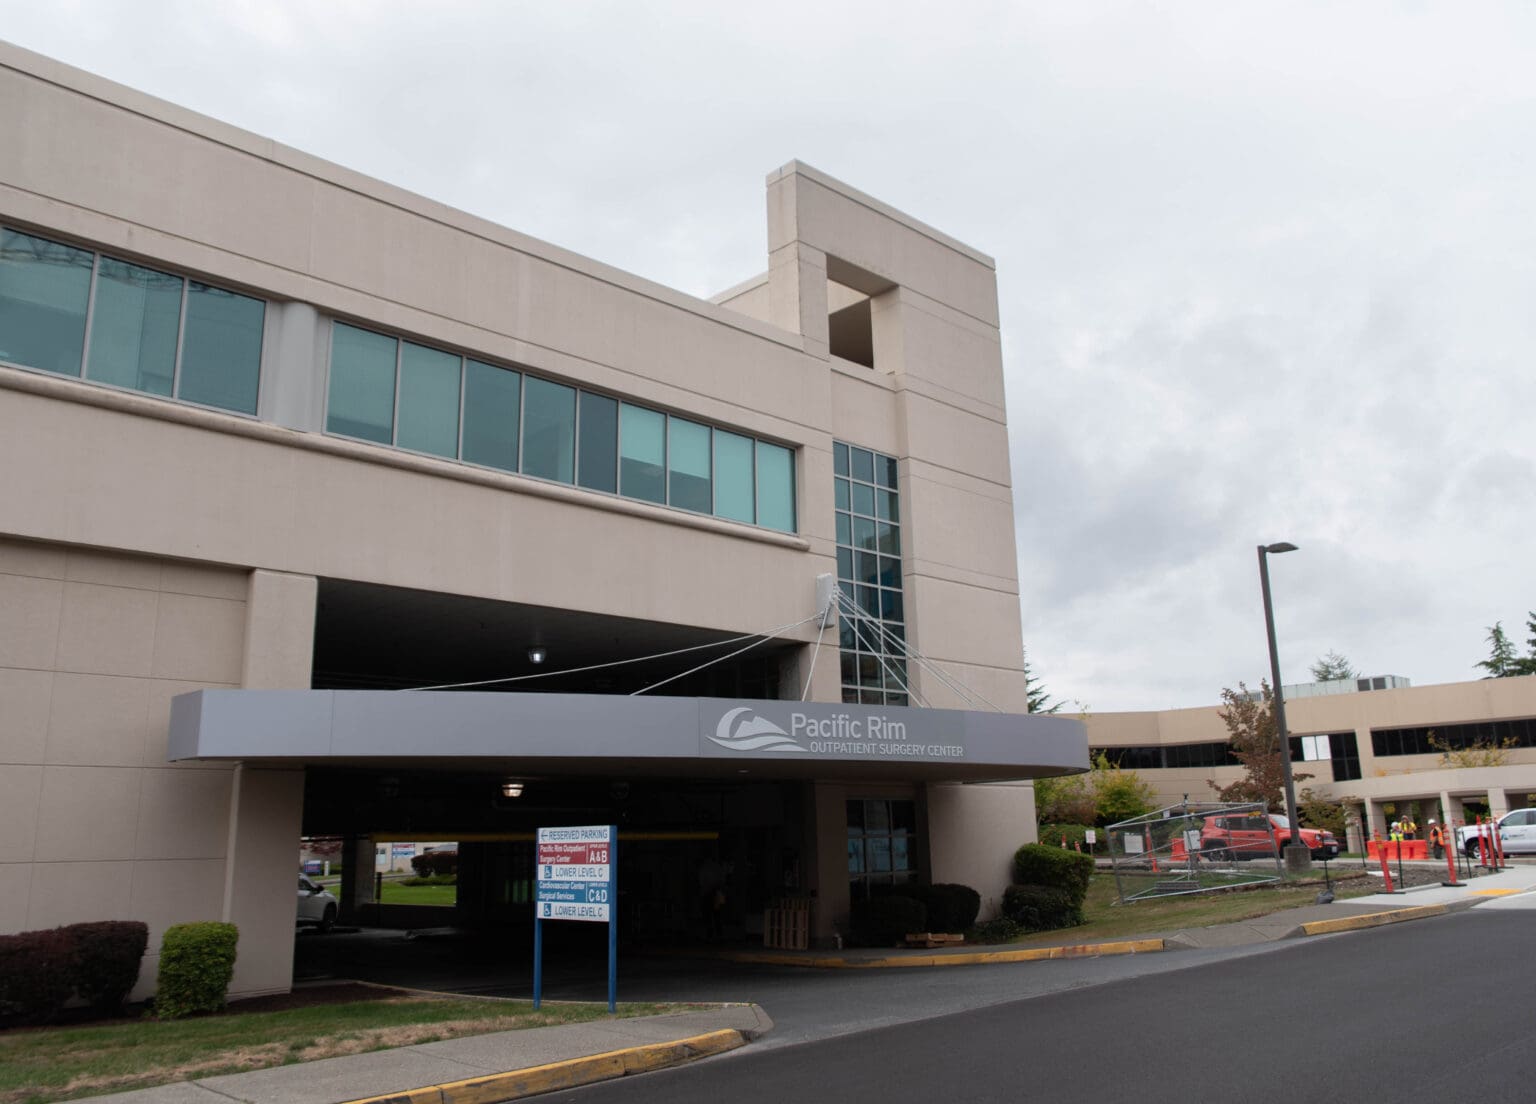 The now-closed Pacific Rim Outpatient Surgery Center is located on the PeaceHealth St. Joseph Medical Center campus.